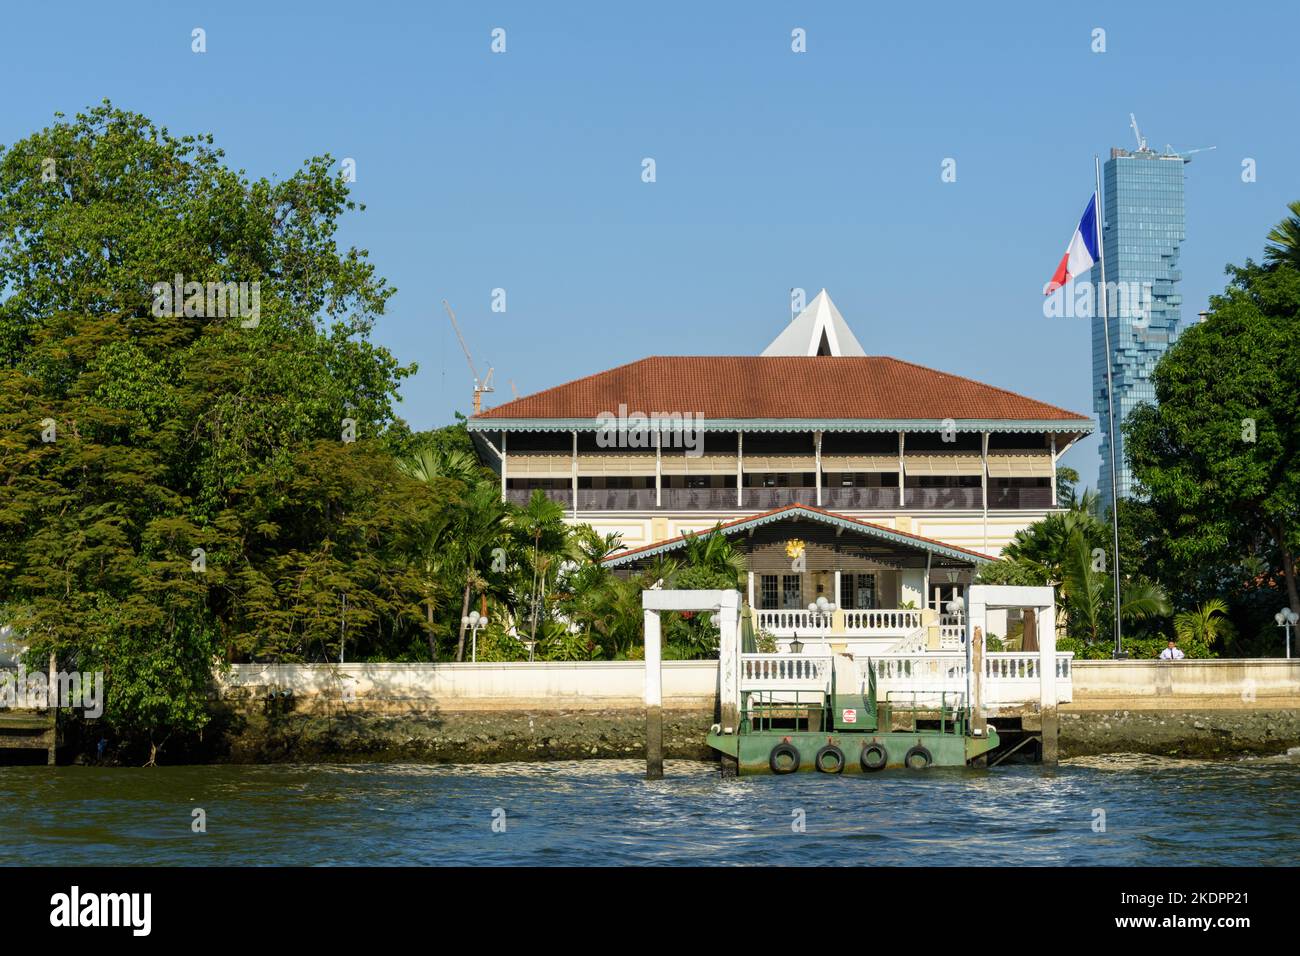 Bangkok, Thailand - March 19th 2018: The 19th century ambassador's residence at the Embassy of France on bank of the Chao Phraya River. Stock Photo